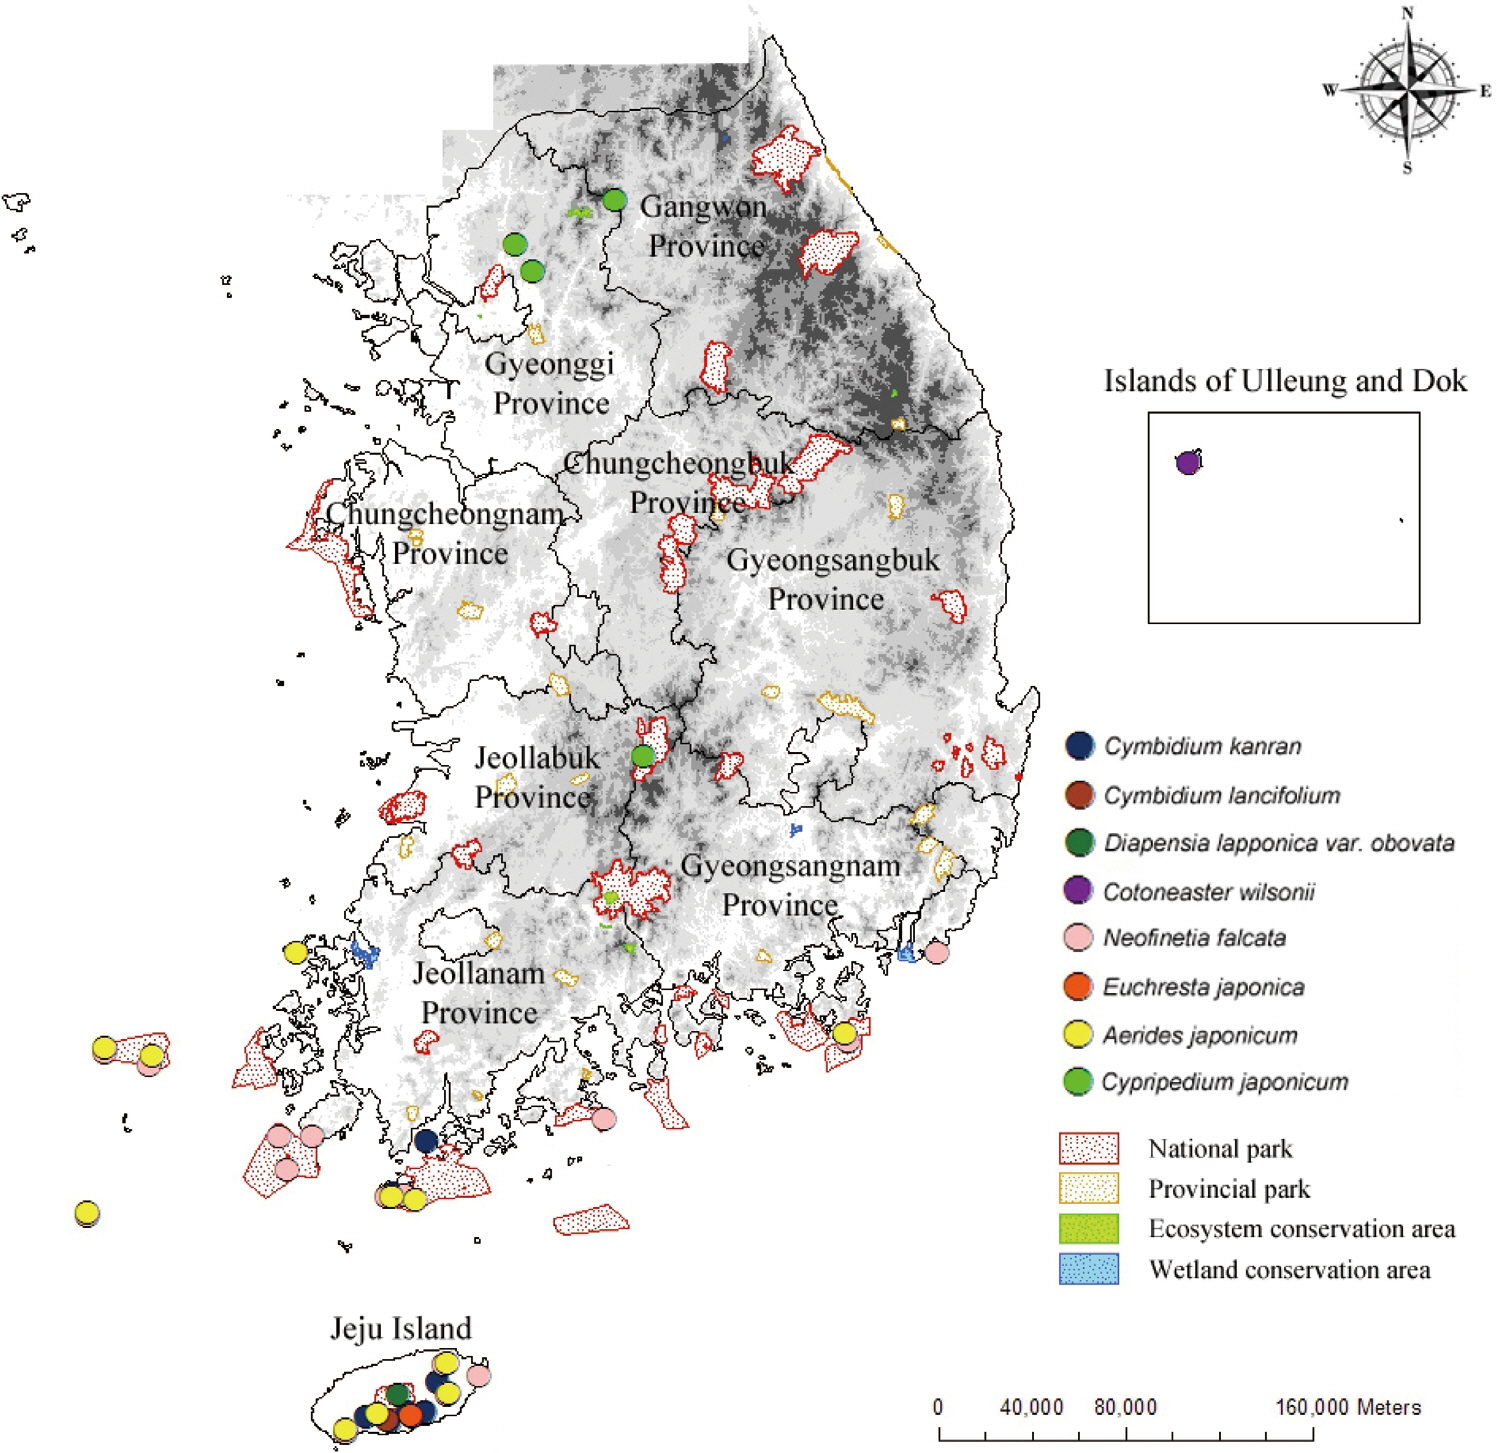 Map showing the habitats of endangerment class I species (N = 8) overlaid with various conservation areas in Korea (20 national parks 21 provincial parks 12 ecosystem conservation areas and 7 wetland conservation areas).